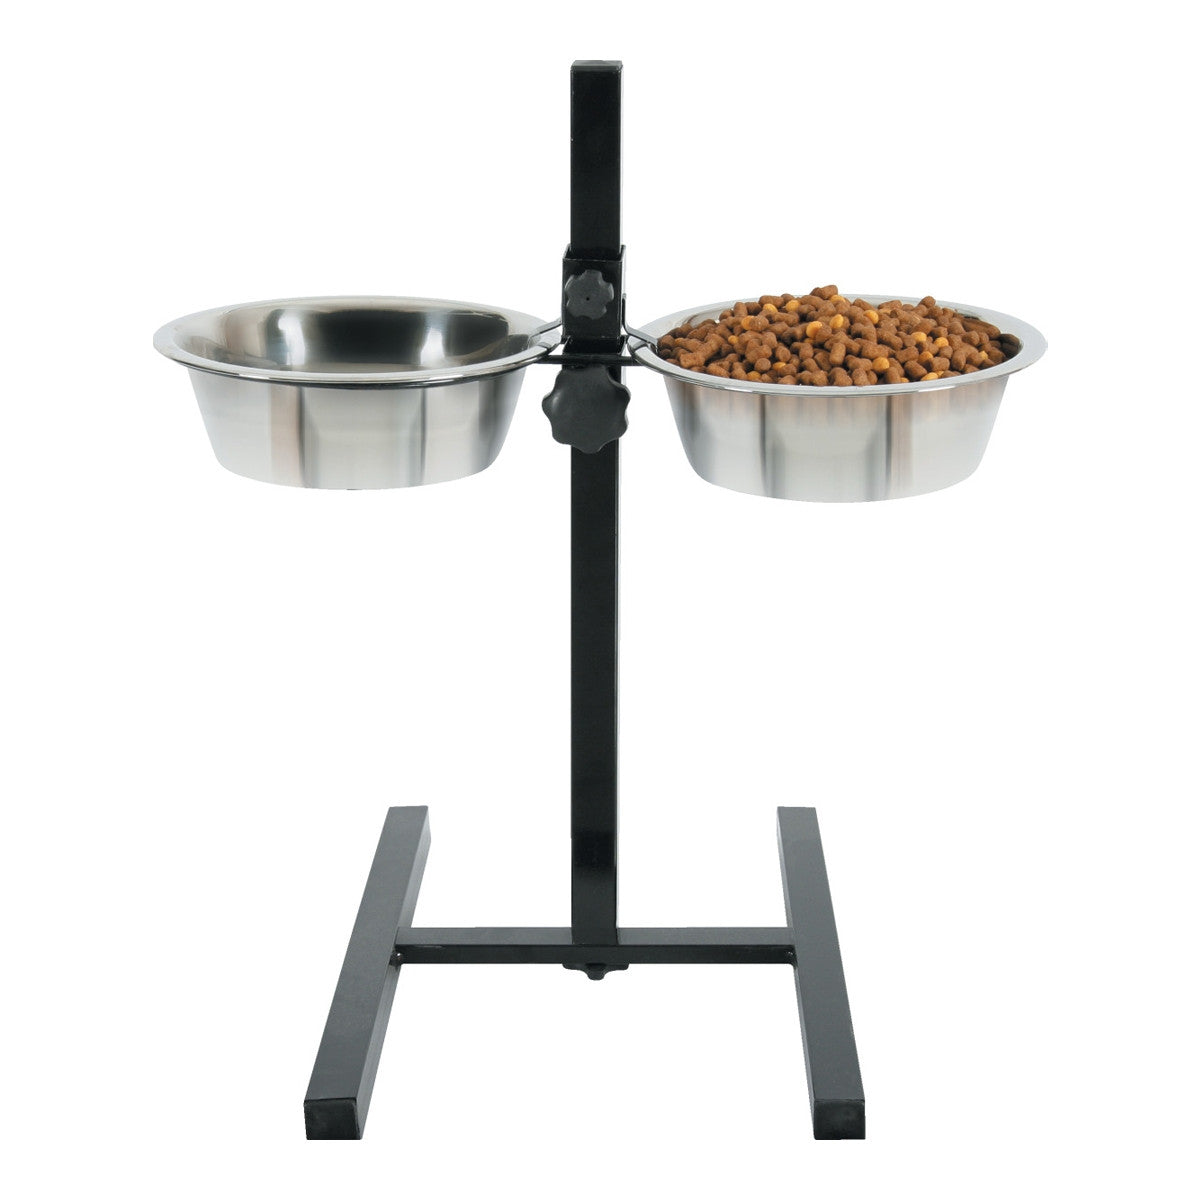 ZOLUX Adjustable Stand with Stainless Steel Bowls (1.5L)